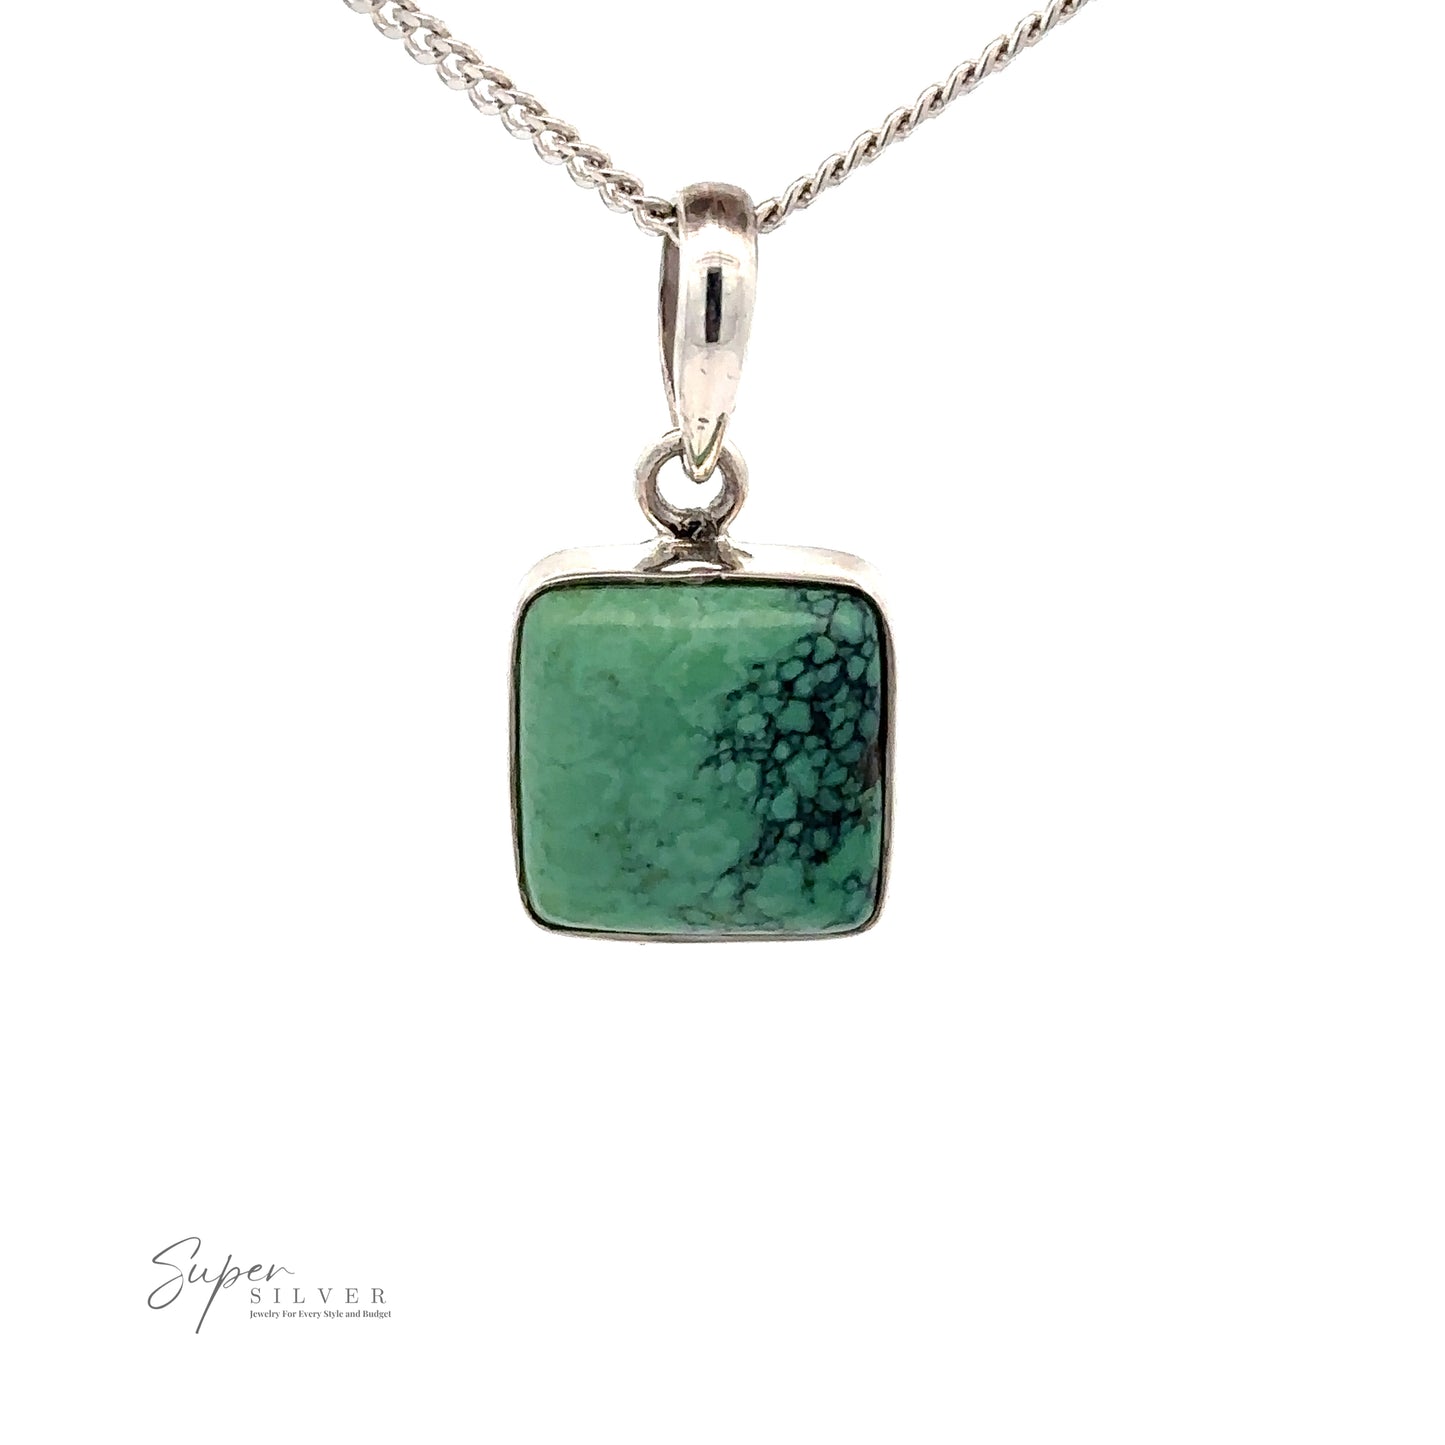 A silver necklace with a Natural Turquoise Square Pendant. The pendant has a web-like black pattern on a green background, hanging from a thin, twisted .925 Sterling Silver chain. Super Silver logo appears at the bottom left.